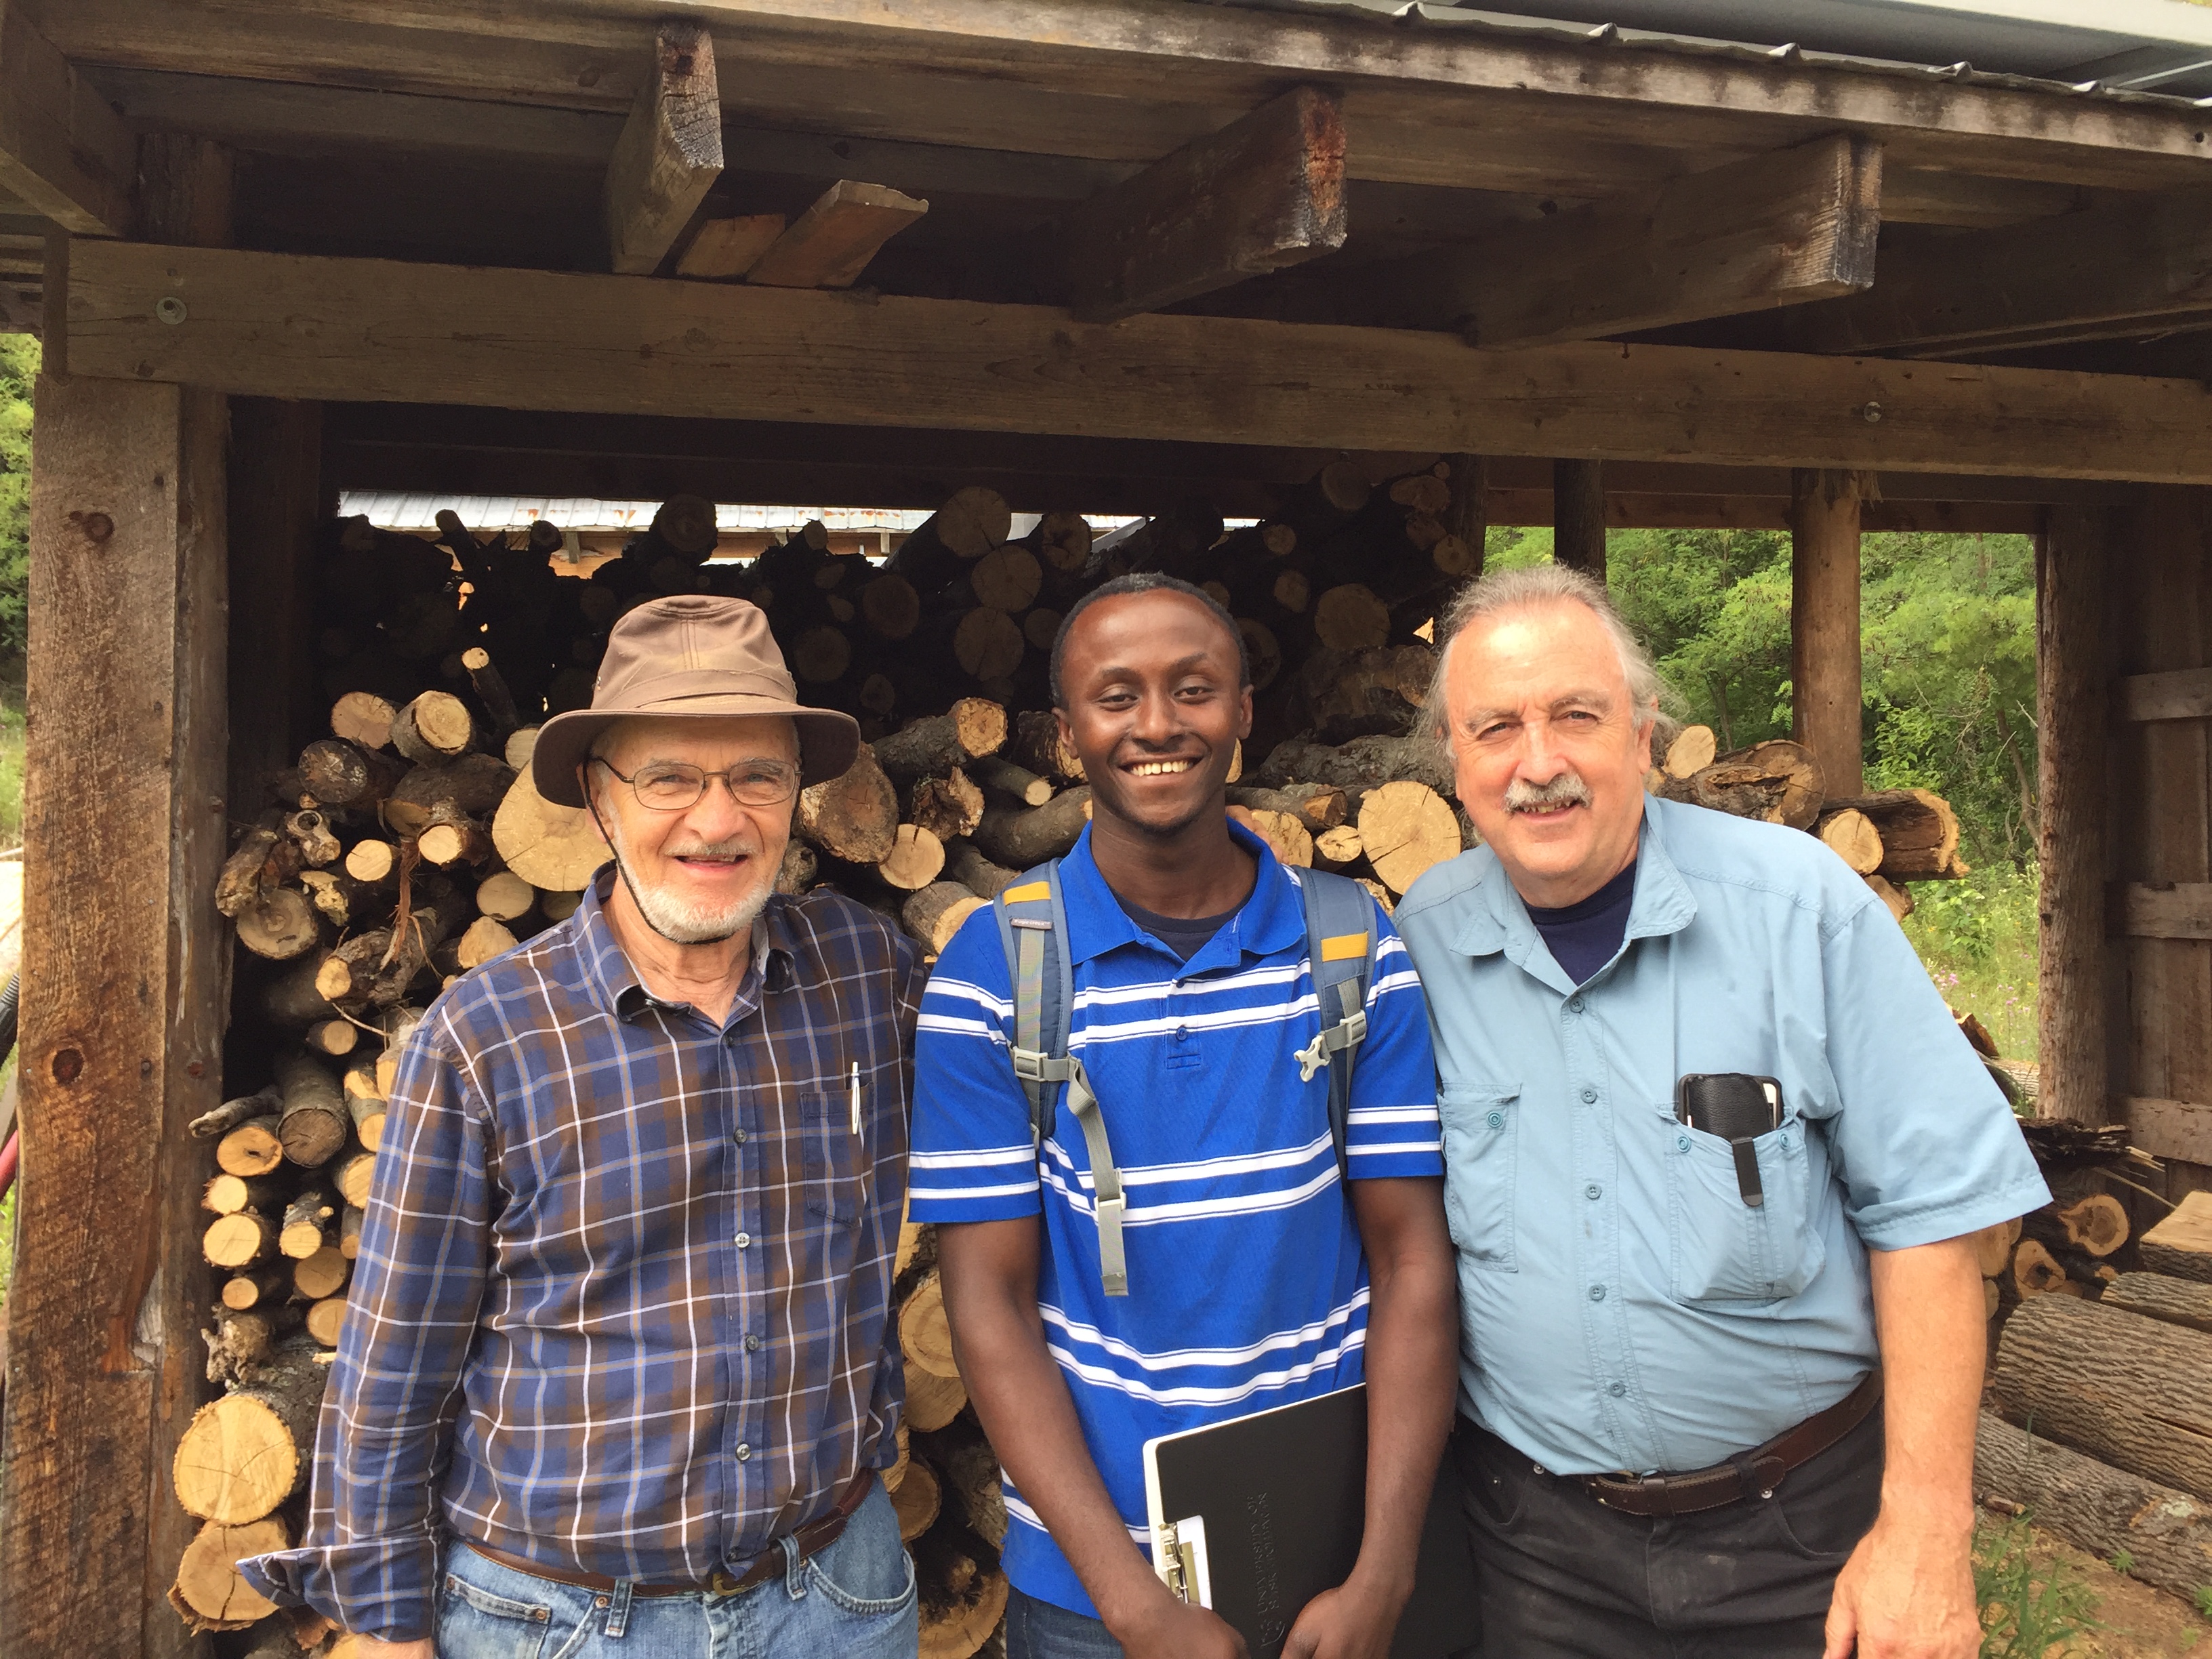 John in a pose with a certified woodlot owner (left) and Larry McDermott (right) the Executive Director of Plenty Canada, a non-profit organization and a certified woodlot owner.